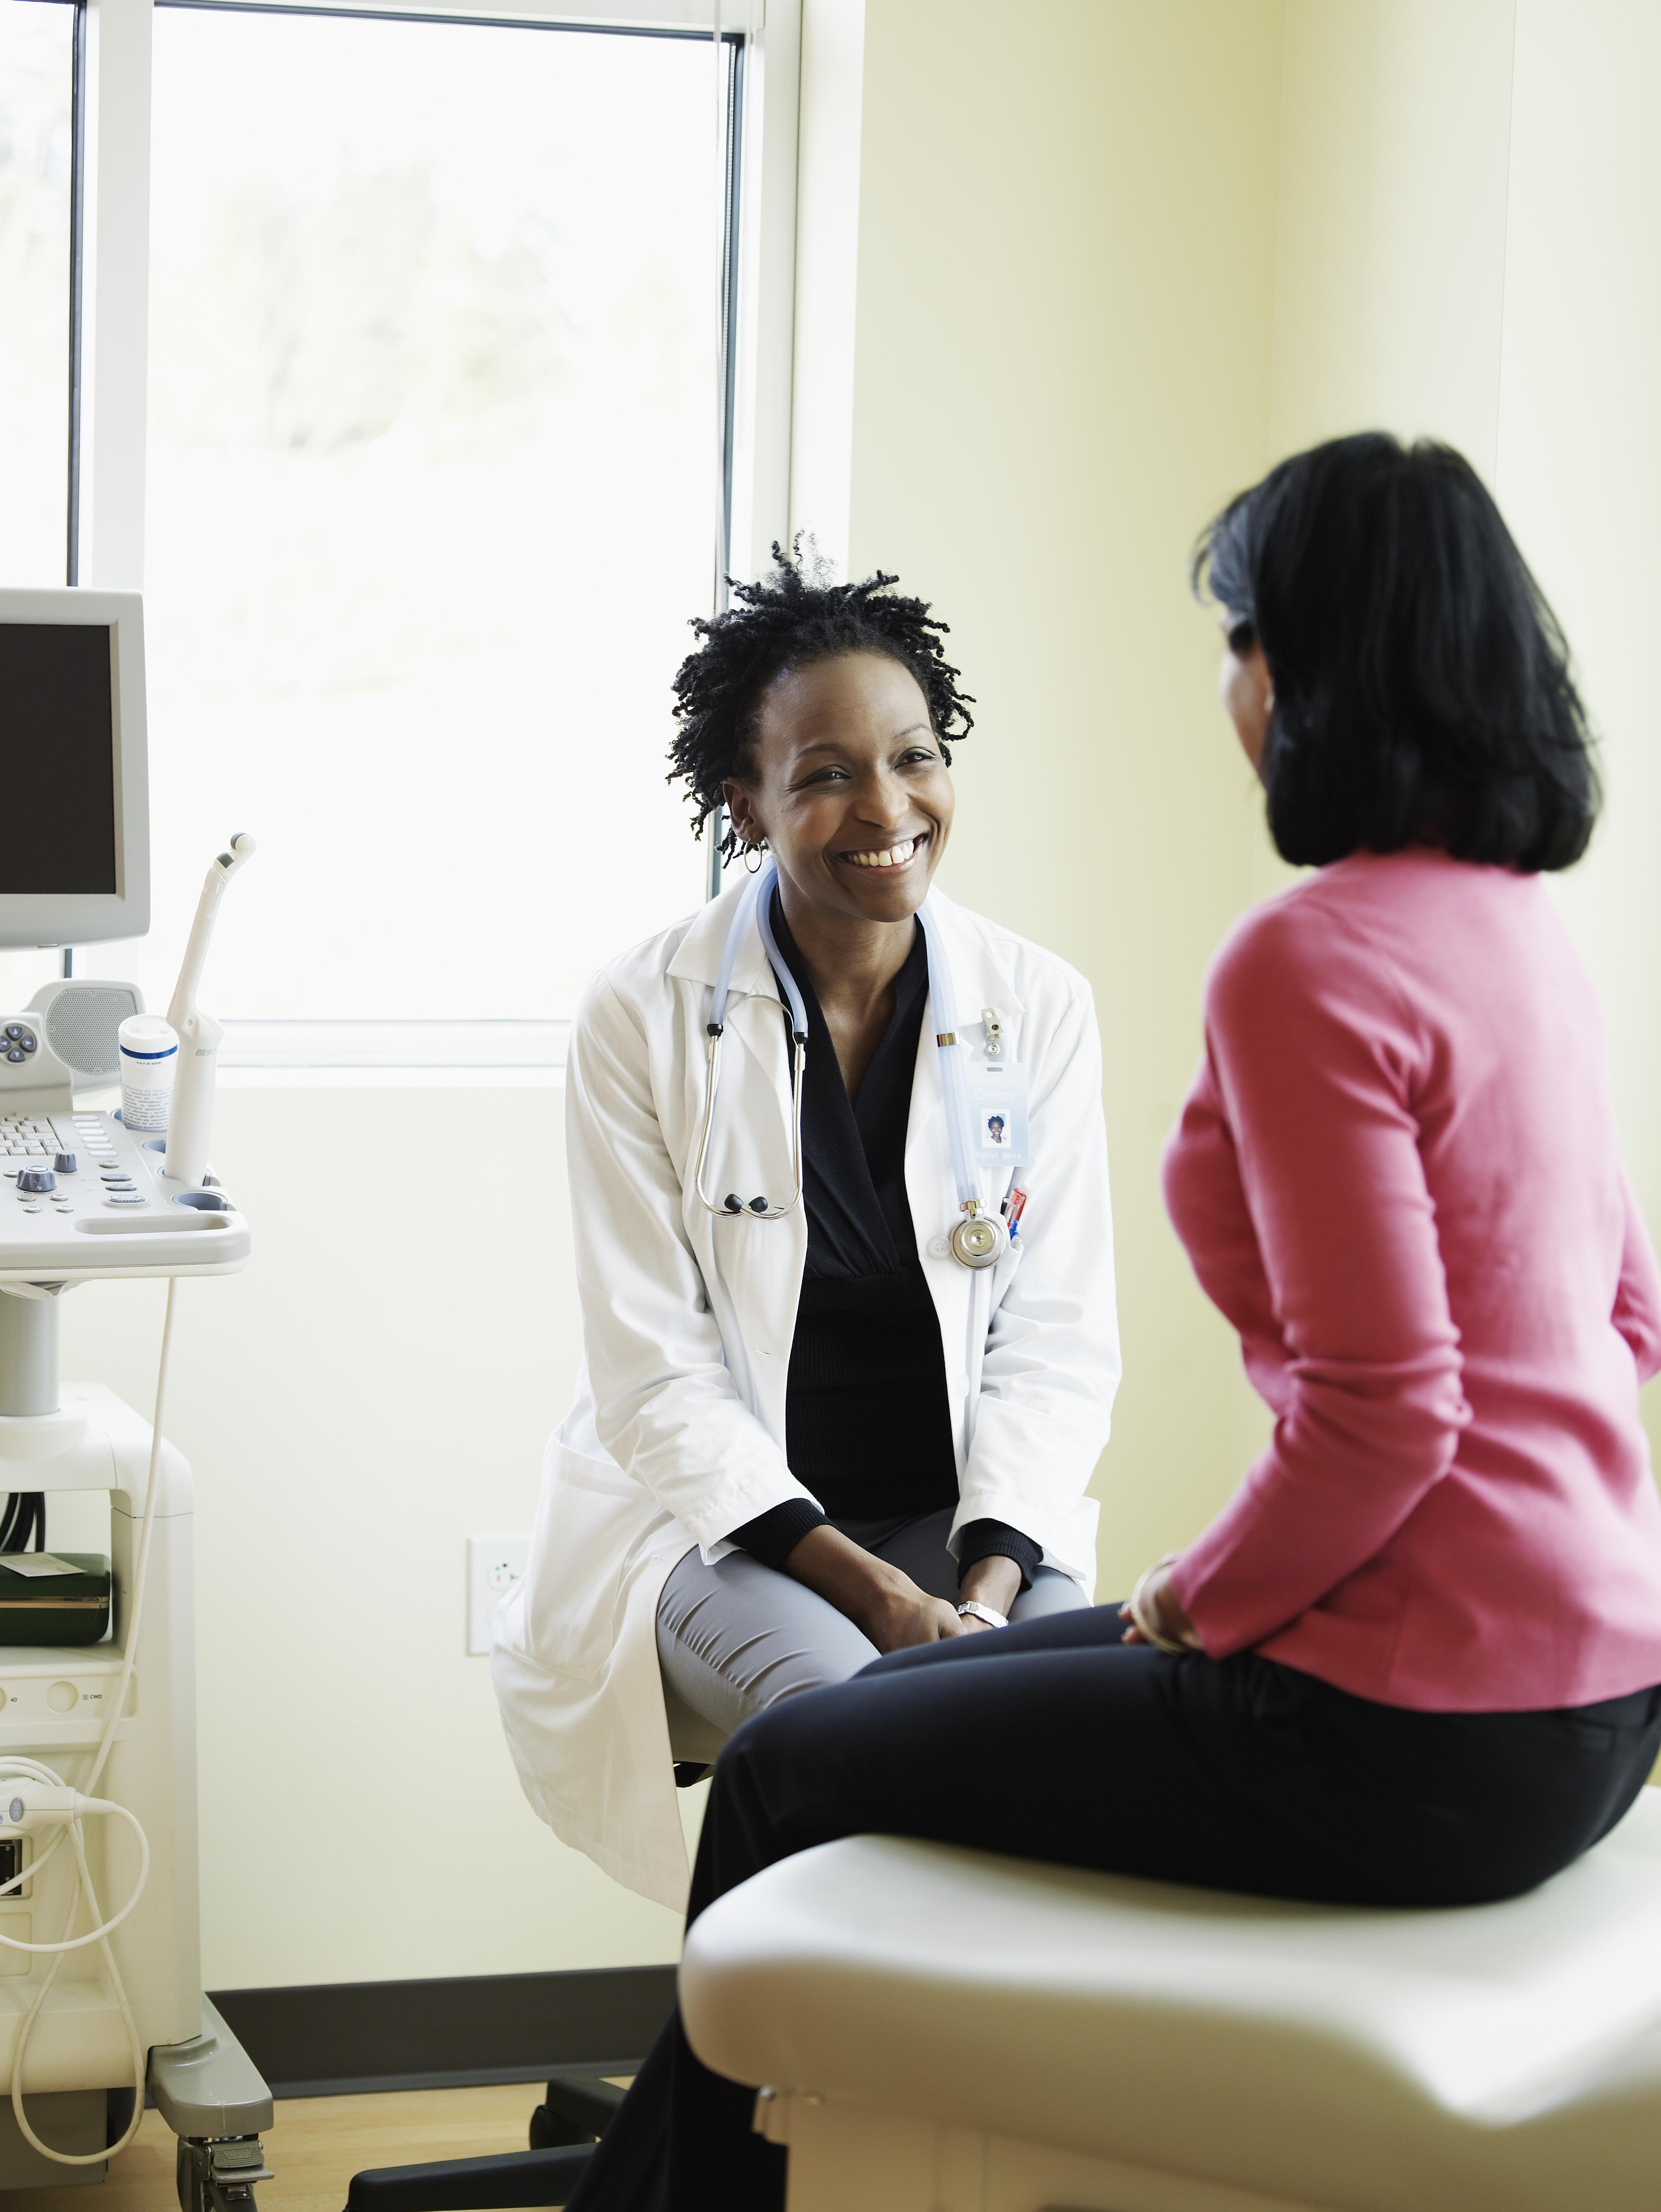 Female doctor talking to woman in exam room, smiling